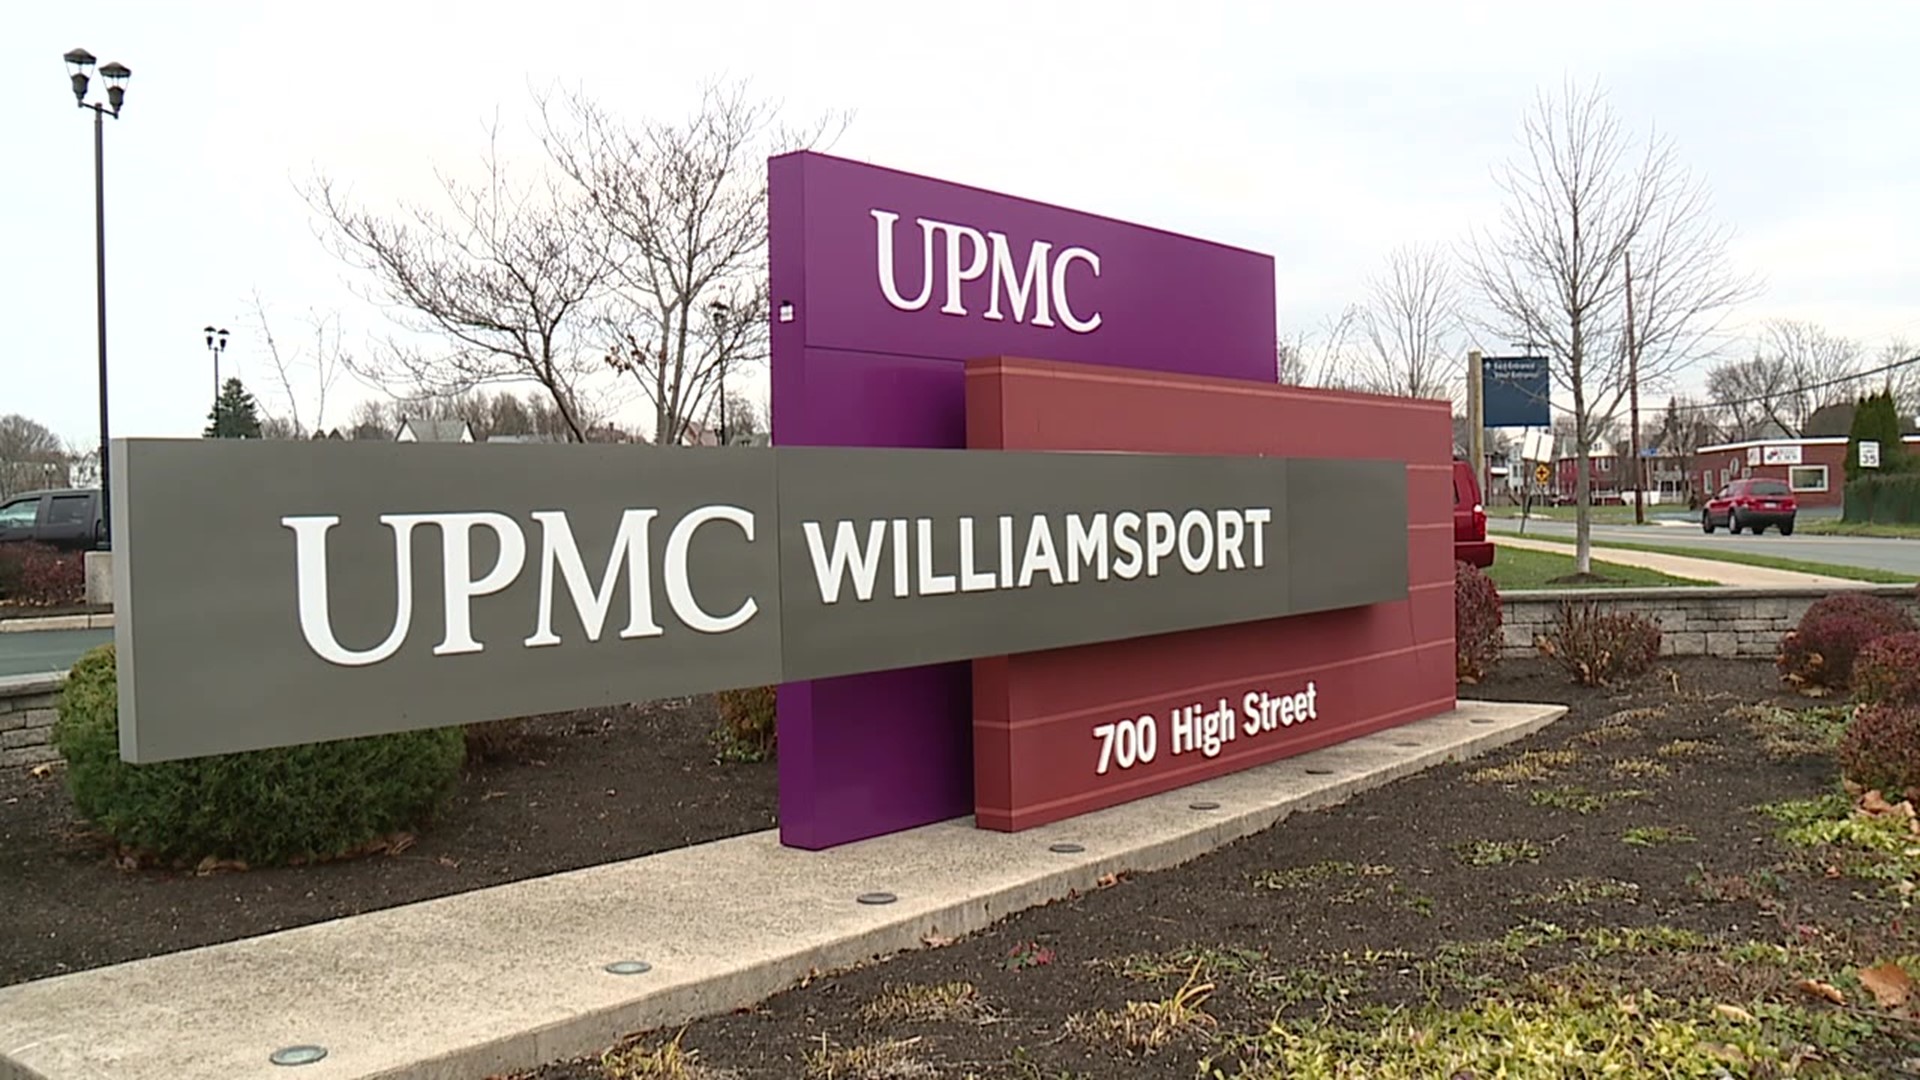 As we approach the winter months, doctors at UPMC Susquehanna are monitoring the virus.